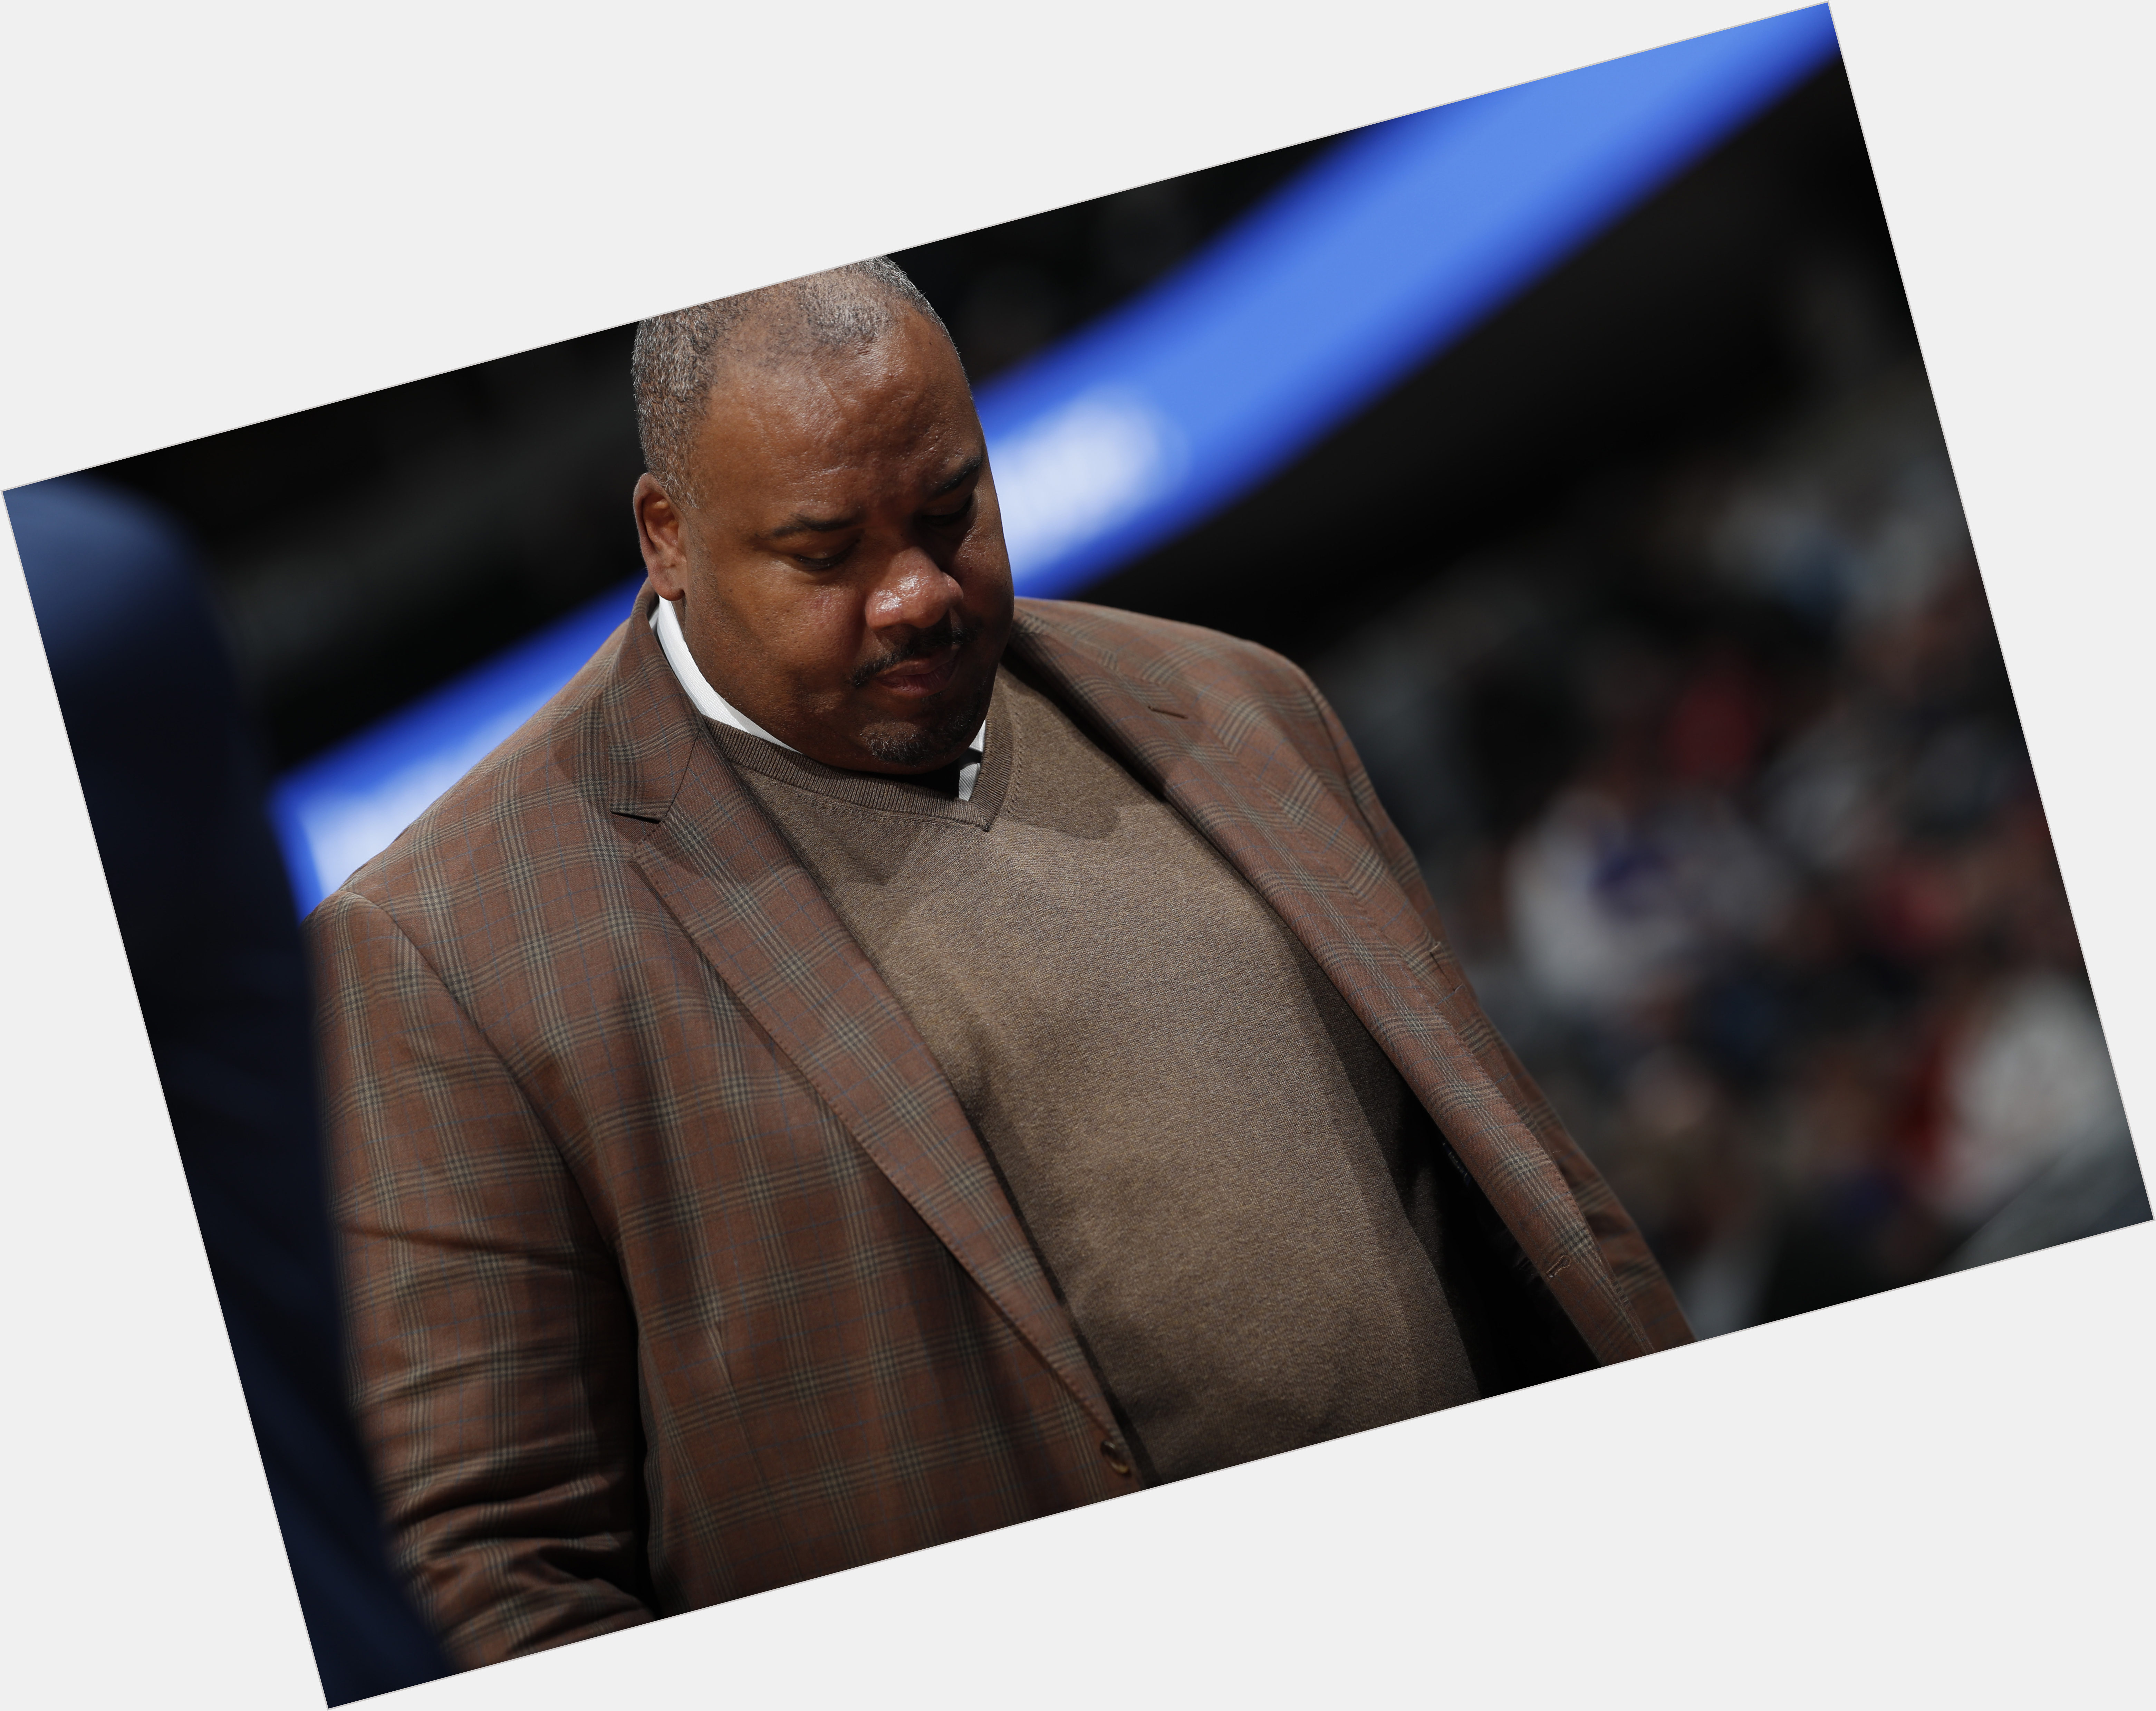 Https://fanpagepress.net/m/S/Stacey King New Pic 1